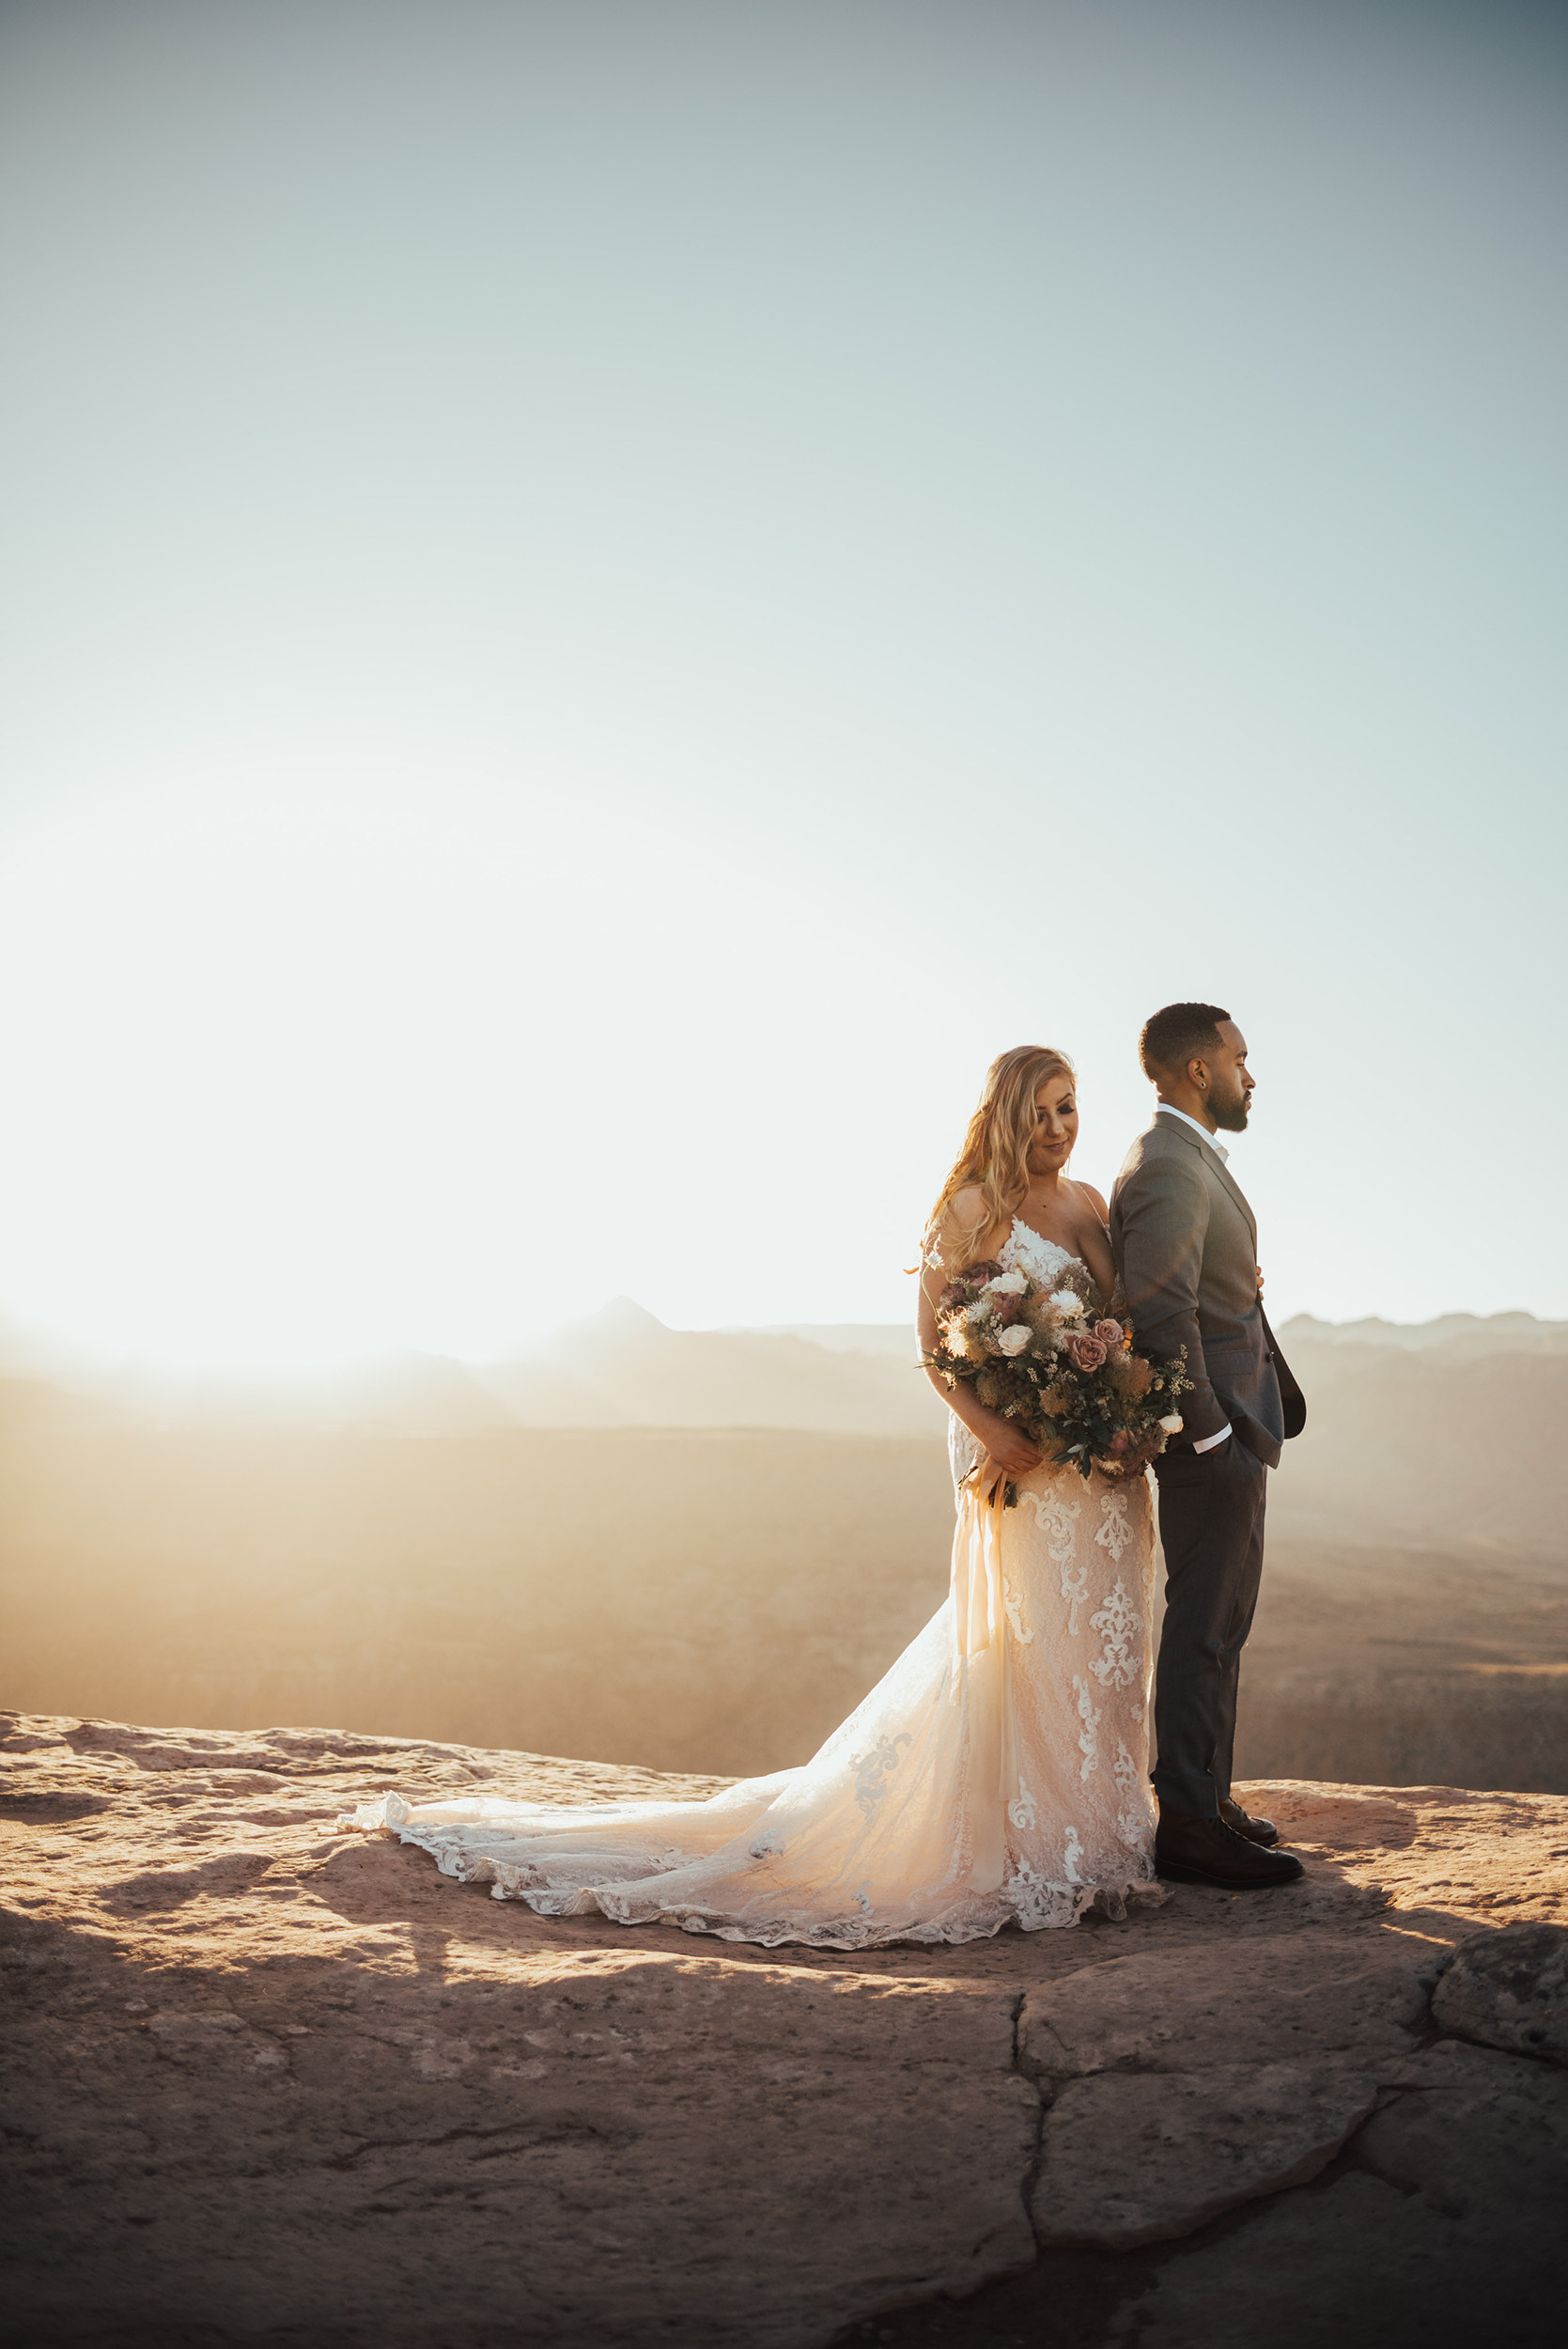 savannah-bridal-shop-ivory-and-beau-maggie-sottero-bride-tuscany-lynette-zion-national-park-wedding-utah-wedding-savannah-wedding-dresses-savannah-wedding-gowns-ashley-smith-photography-vanilla-and-the-bean-6.JPG